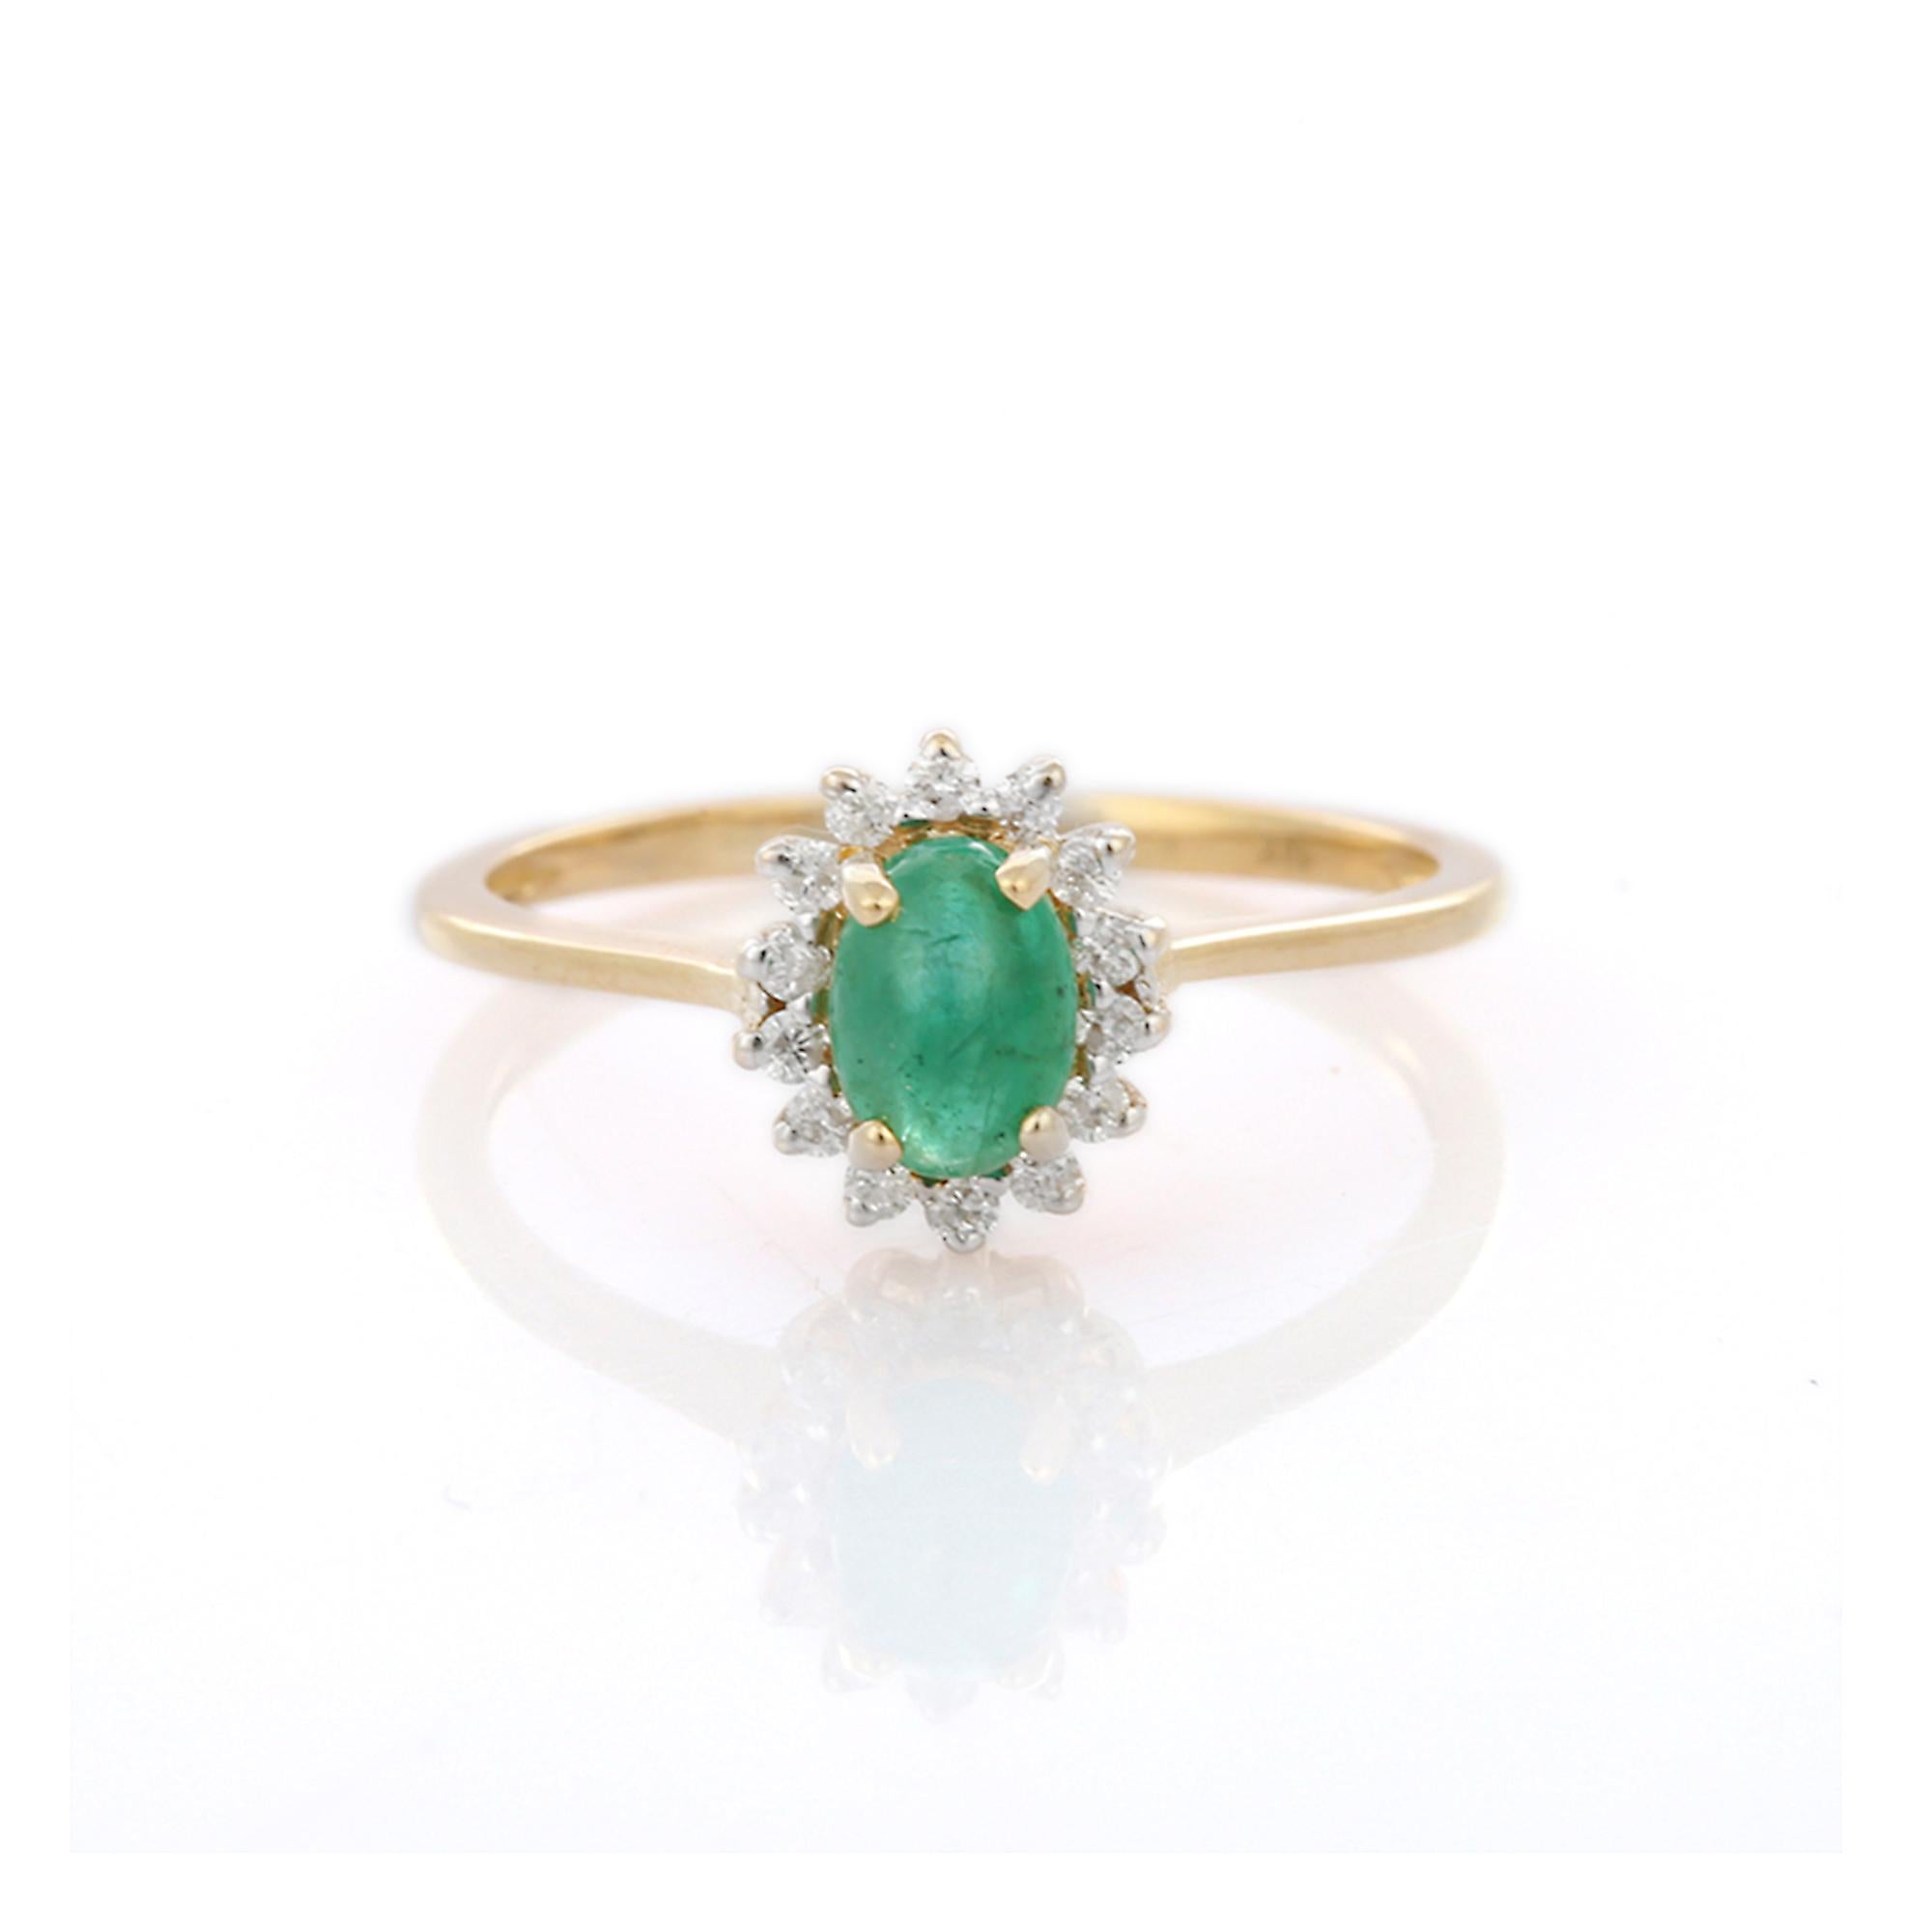 For Sale:  14K Yellow Gold Ring with Oval Cut Emerald and Diamonds, Emerald Halo Ring 5